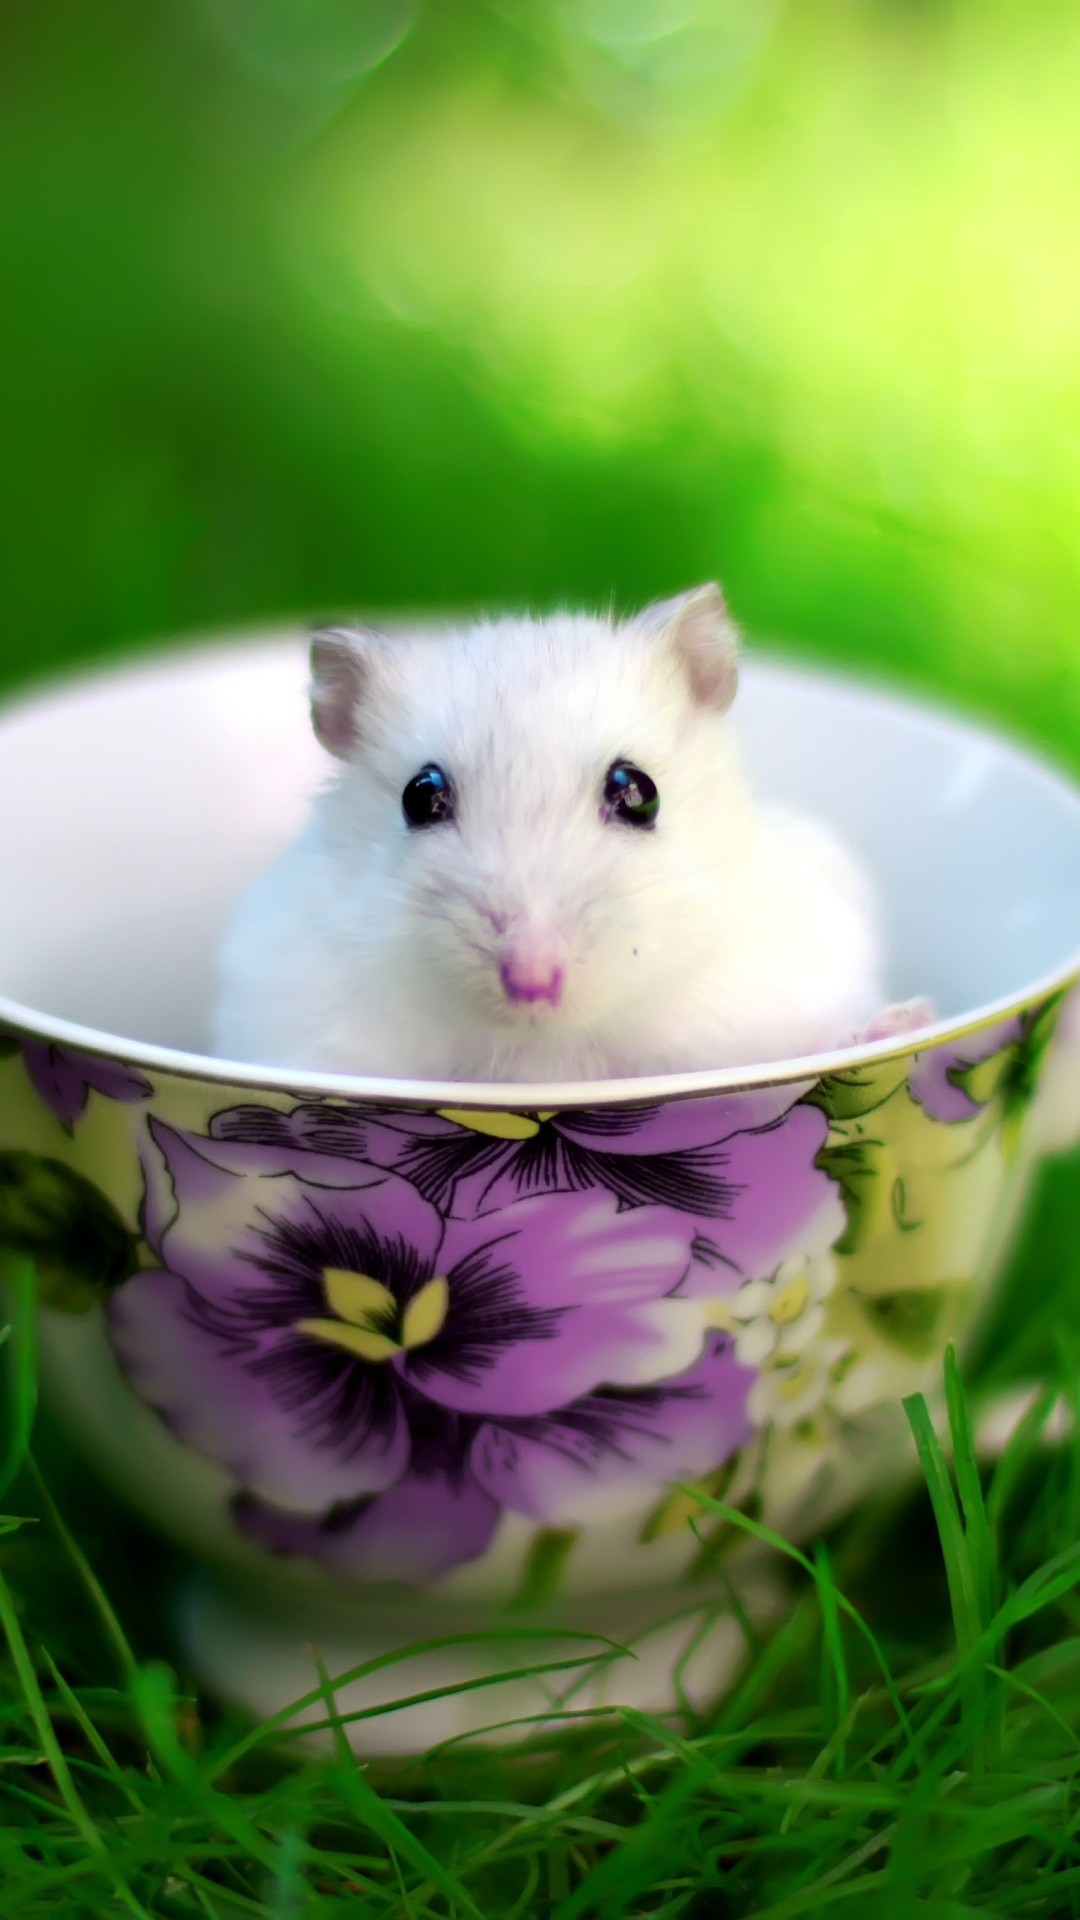 1080x1920 Cute White Mouse In Cup